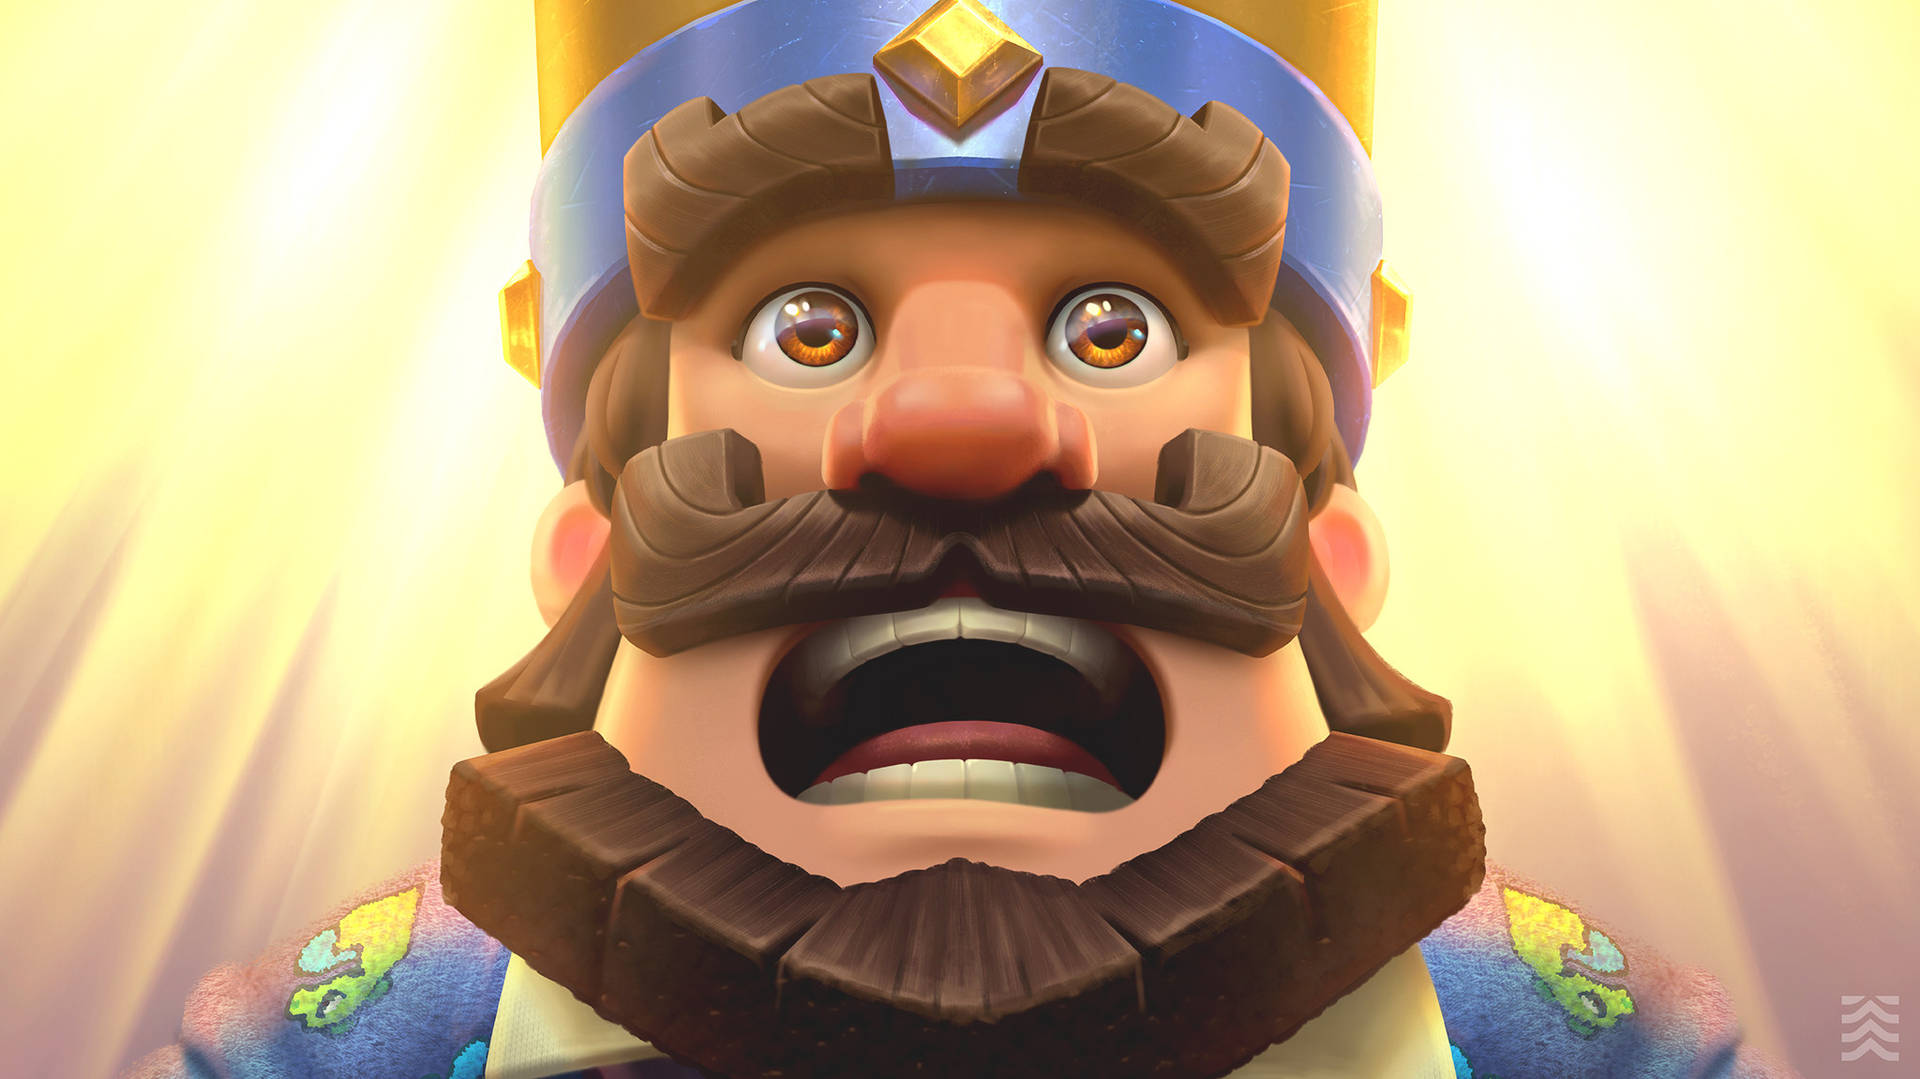 King From The Clash Royale Phone Game Looking Surprised Wallpaper